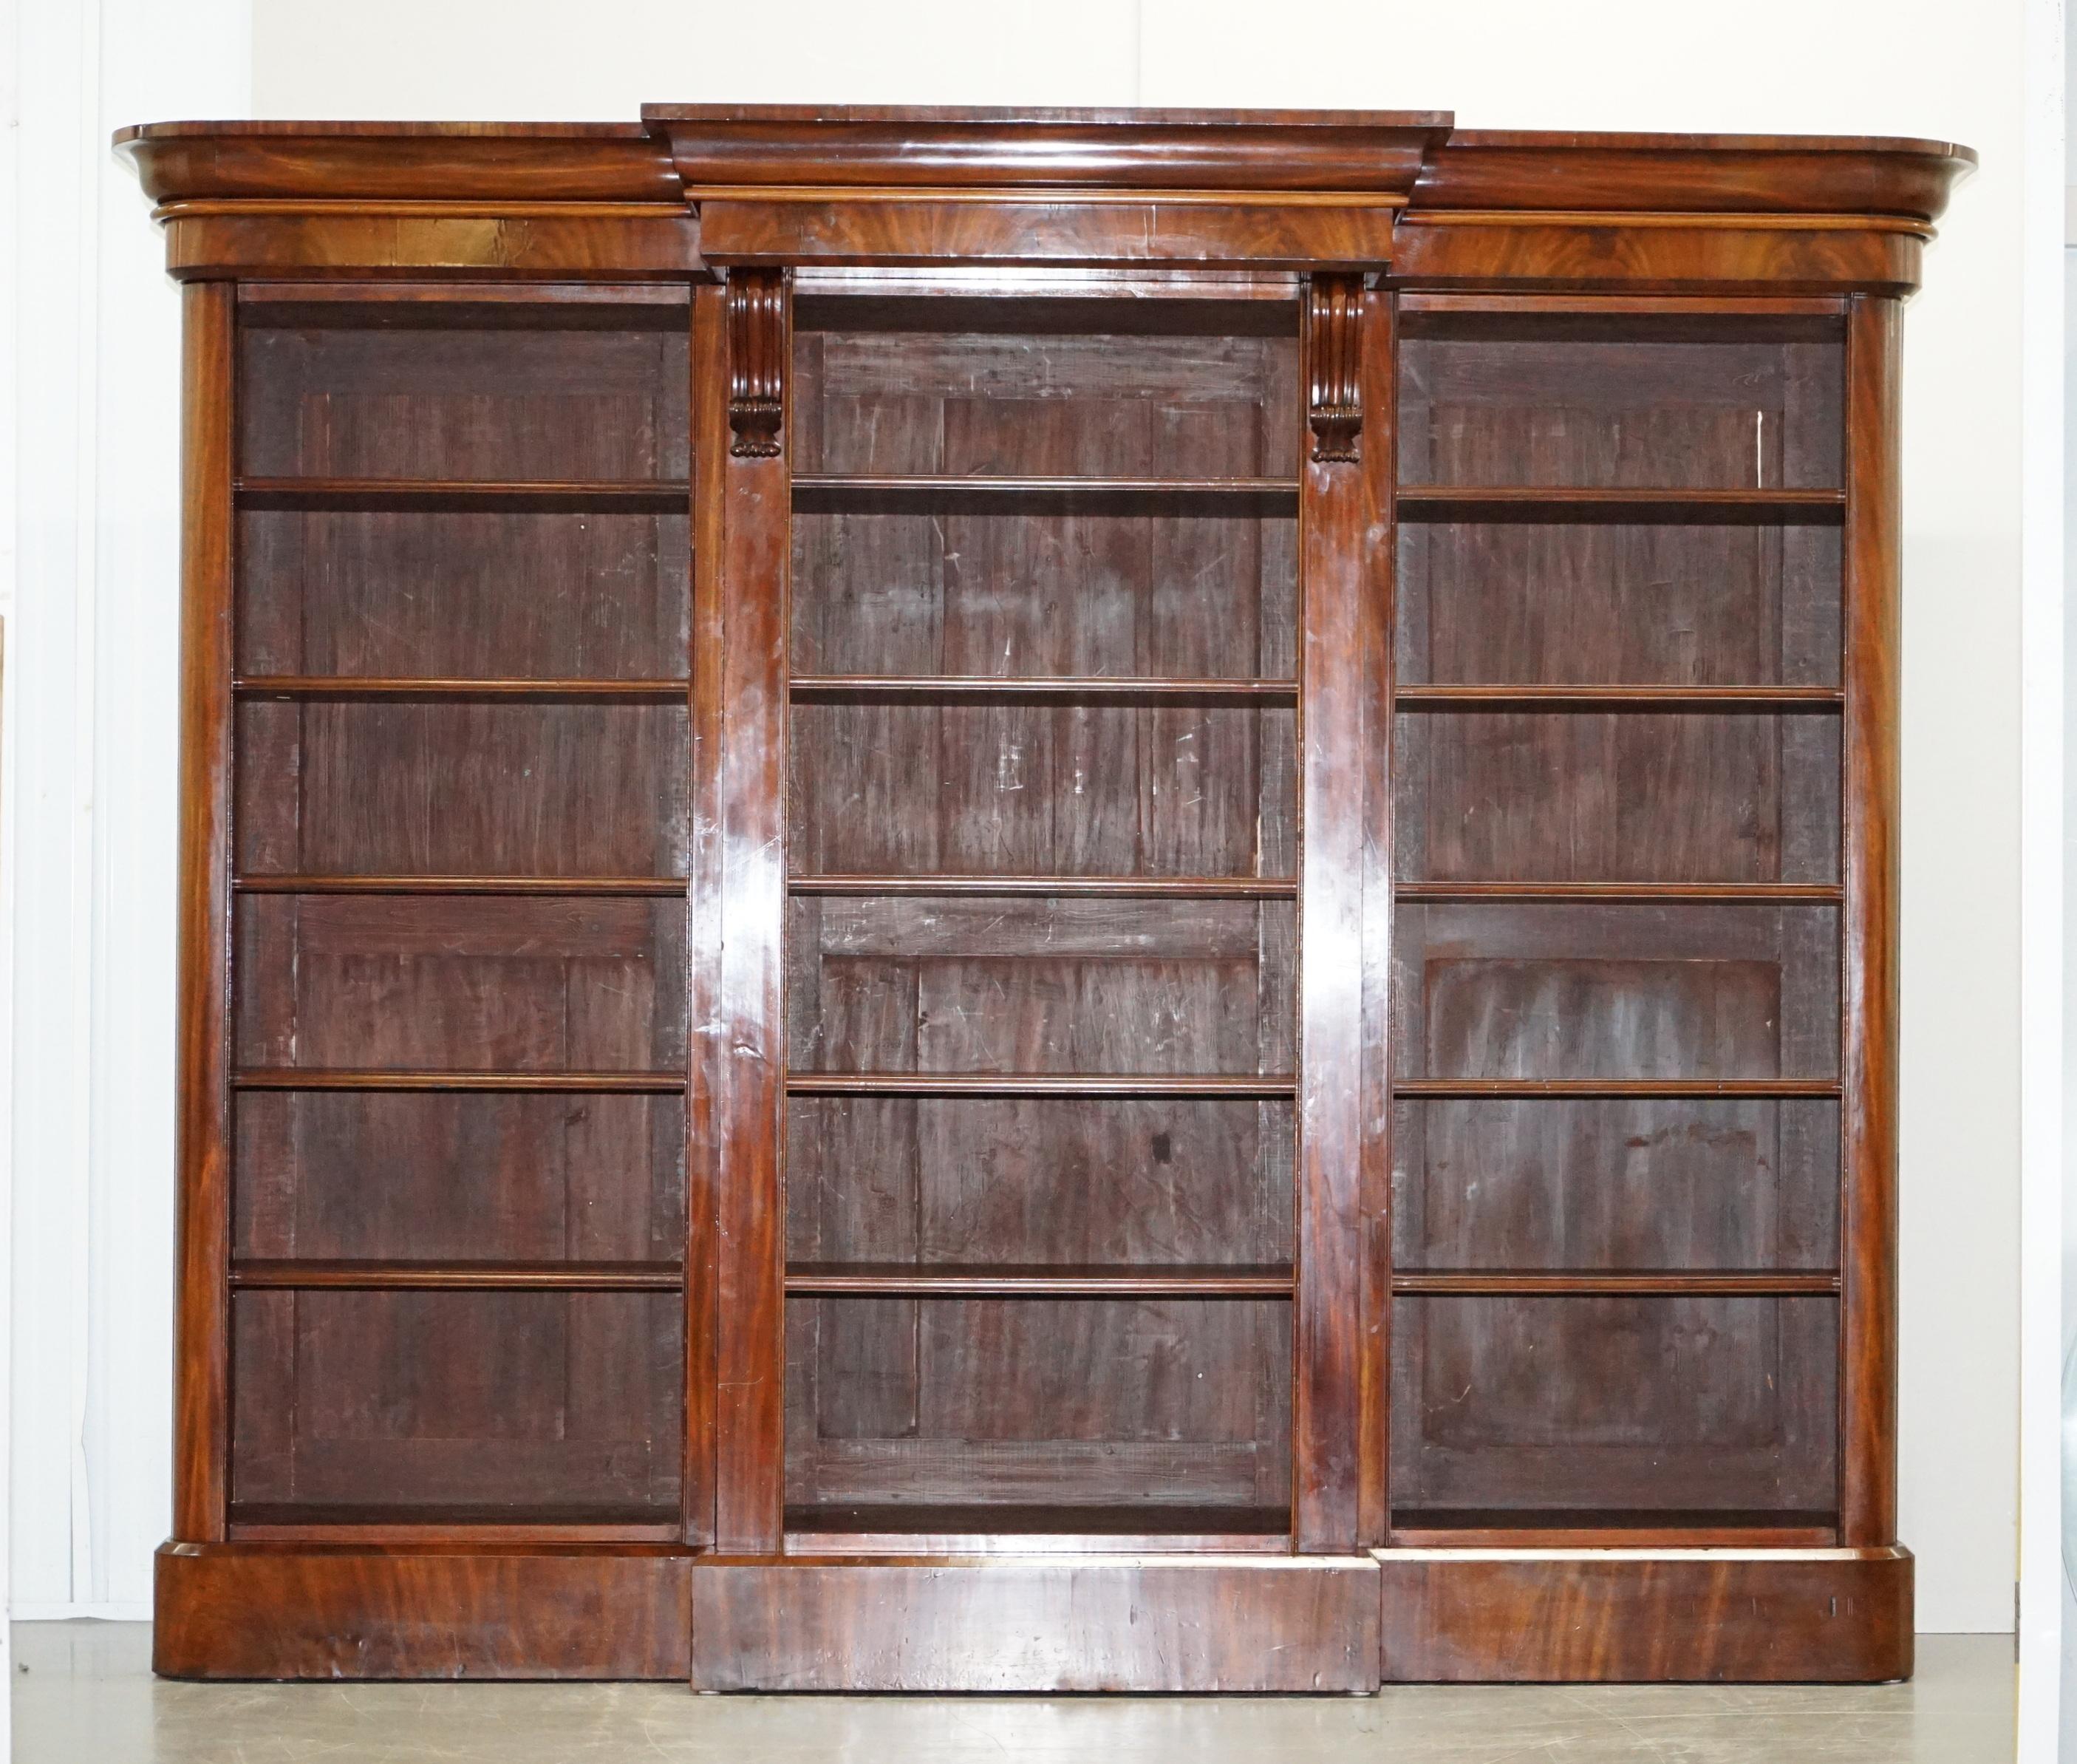 We are delighted to offer for sale this absolutely sublime fully restored mid Victorian circa 1860 flamed mahogany library breakfront bookcase 

A very well made and exceptionally decorative piece of mid Victorian Library furniture. The bookcase